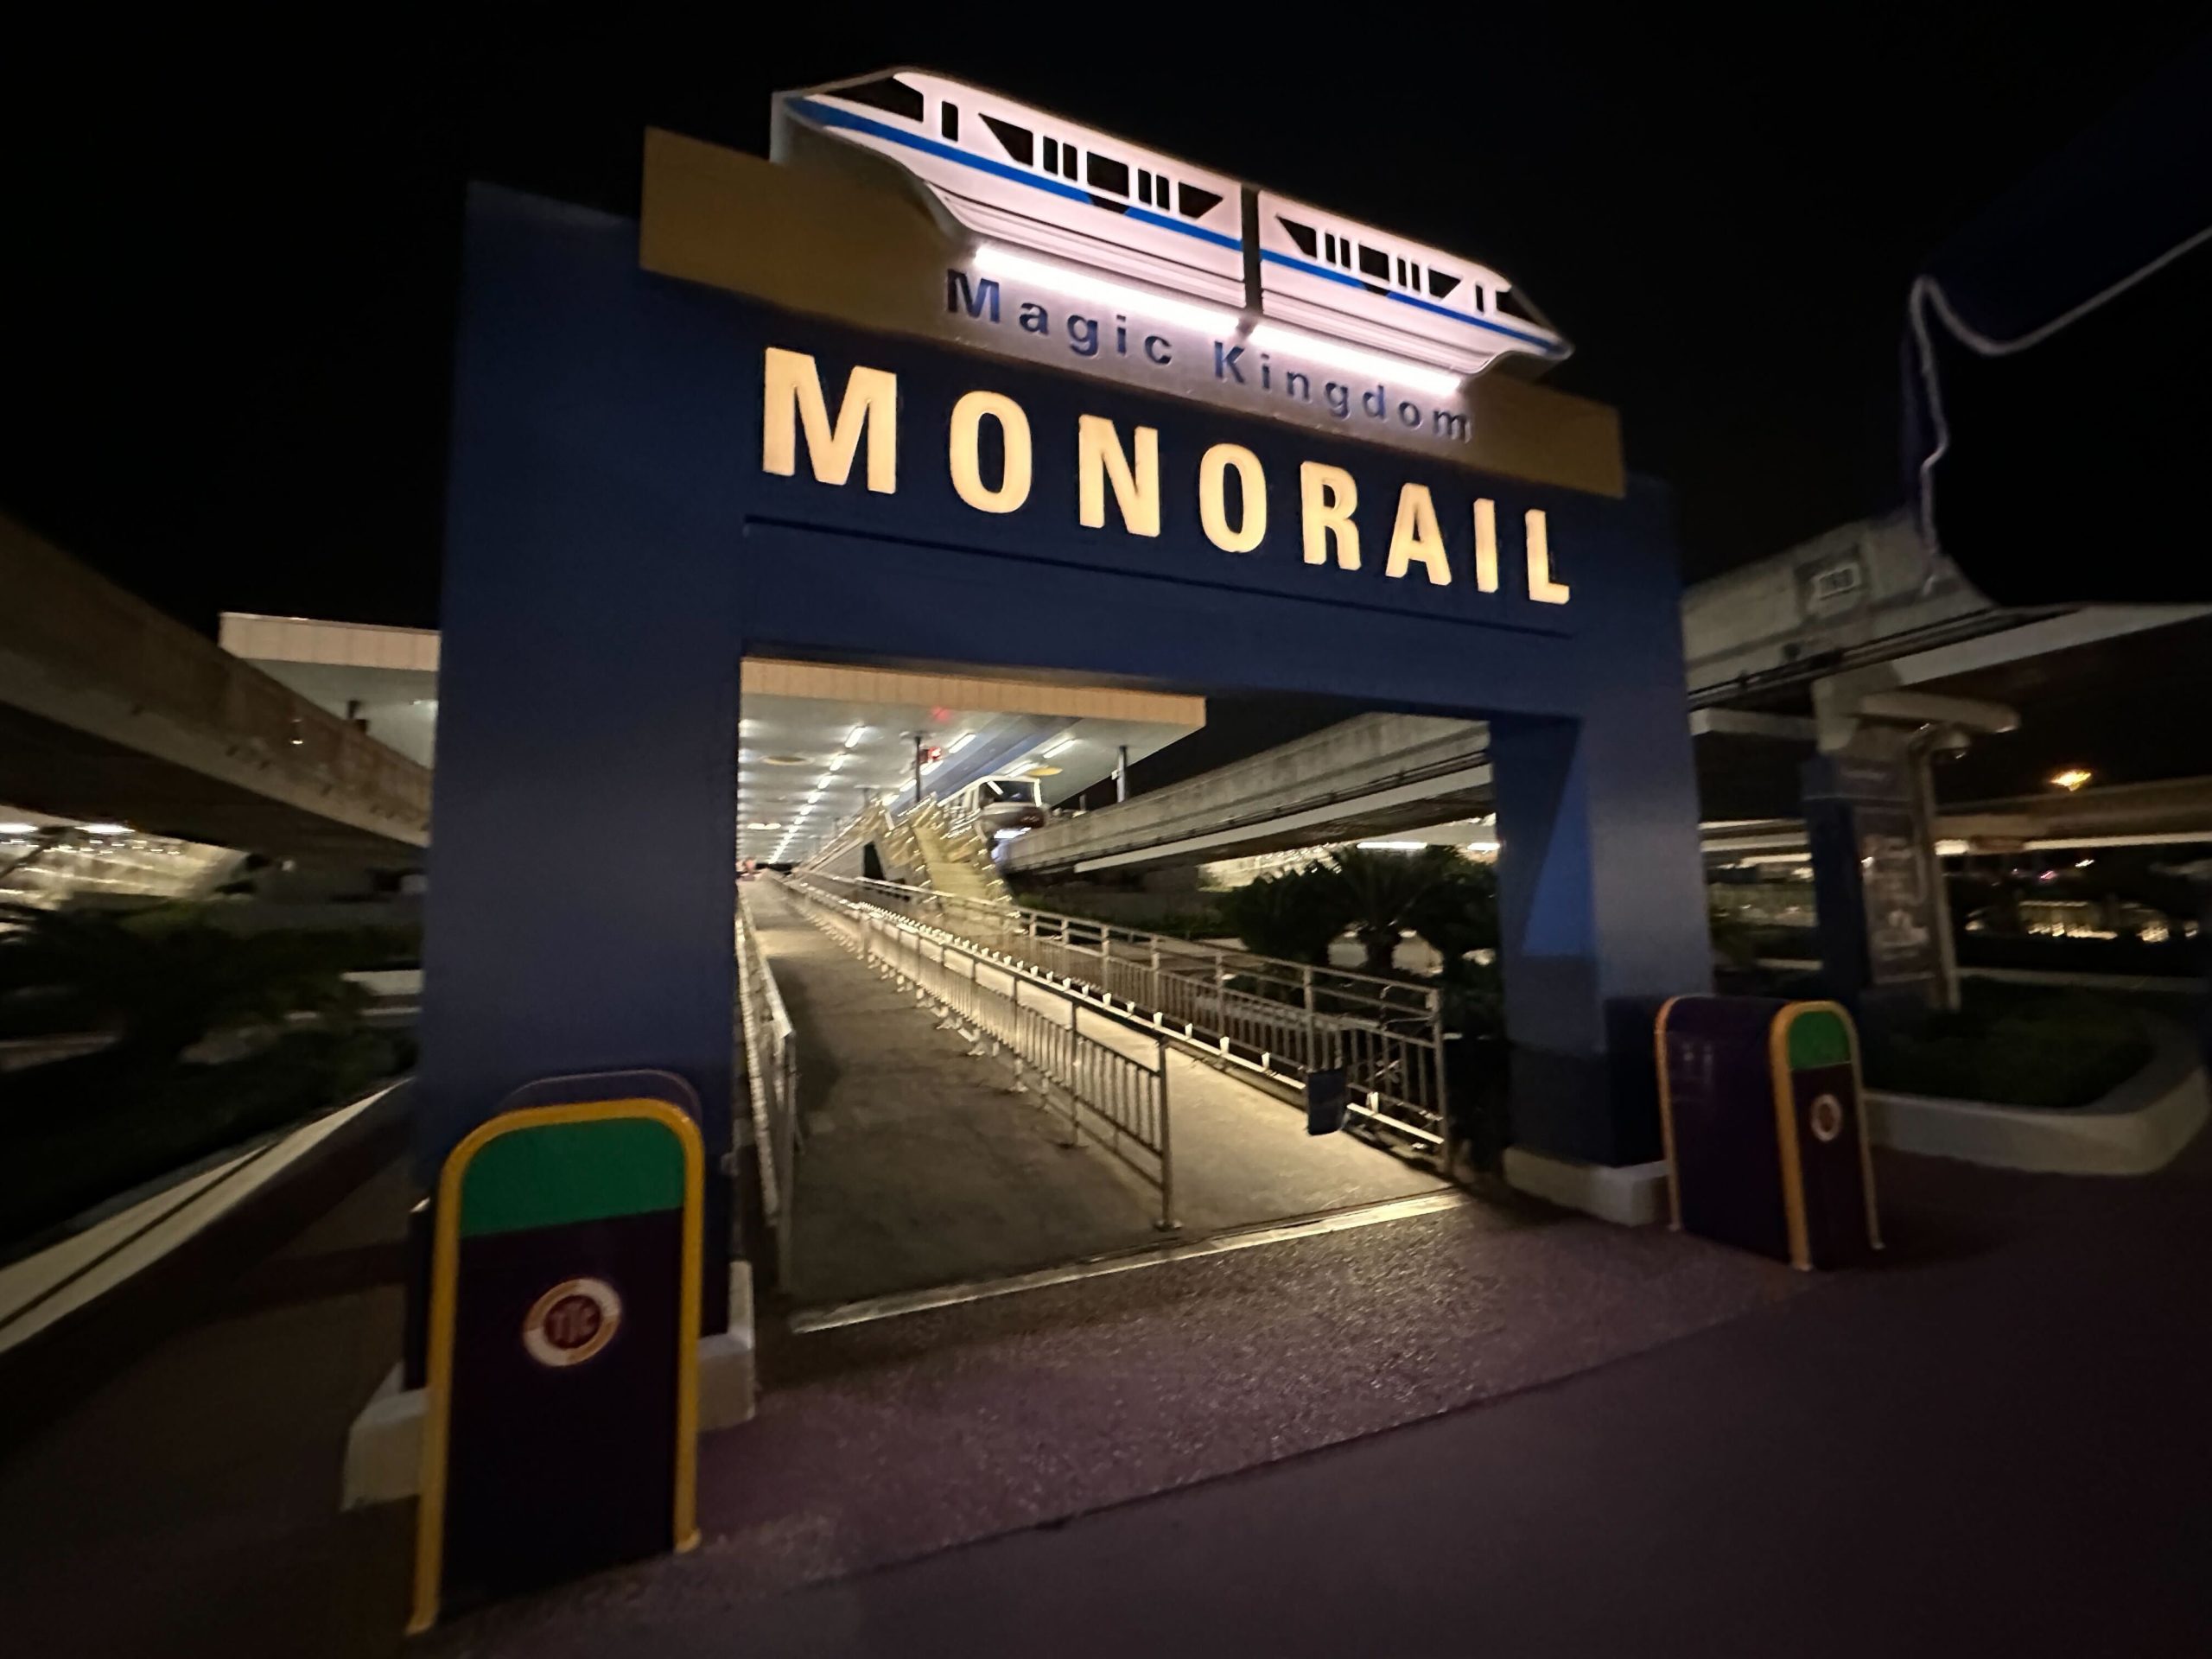 4th july monorail red white blue